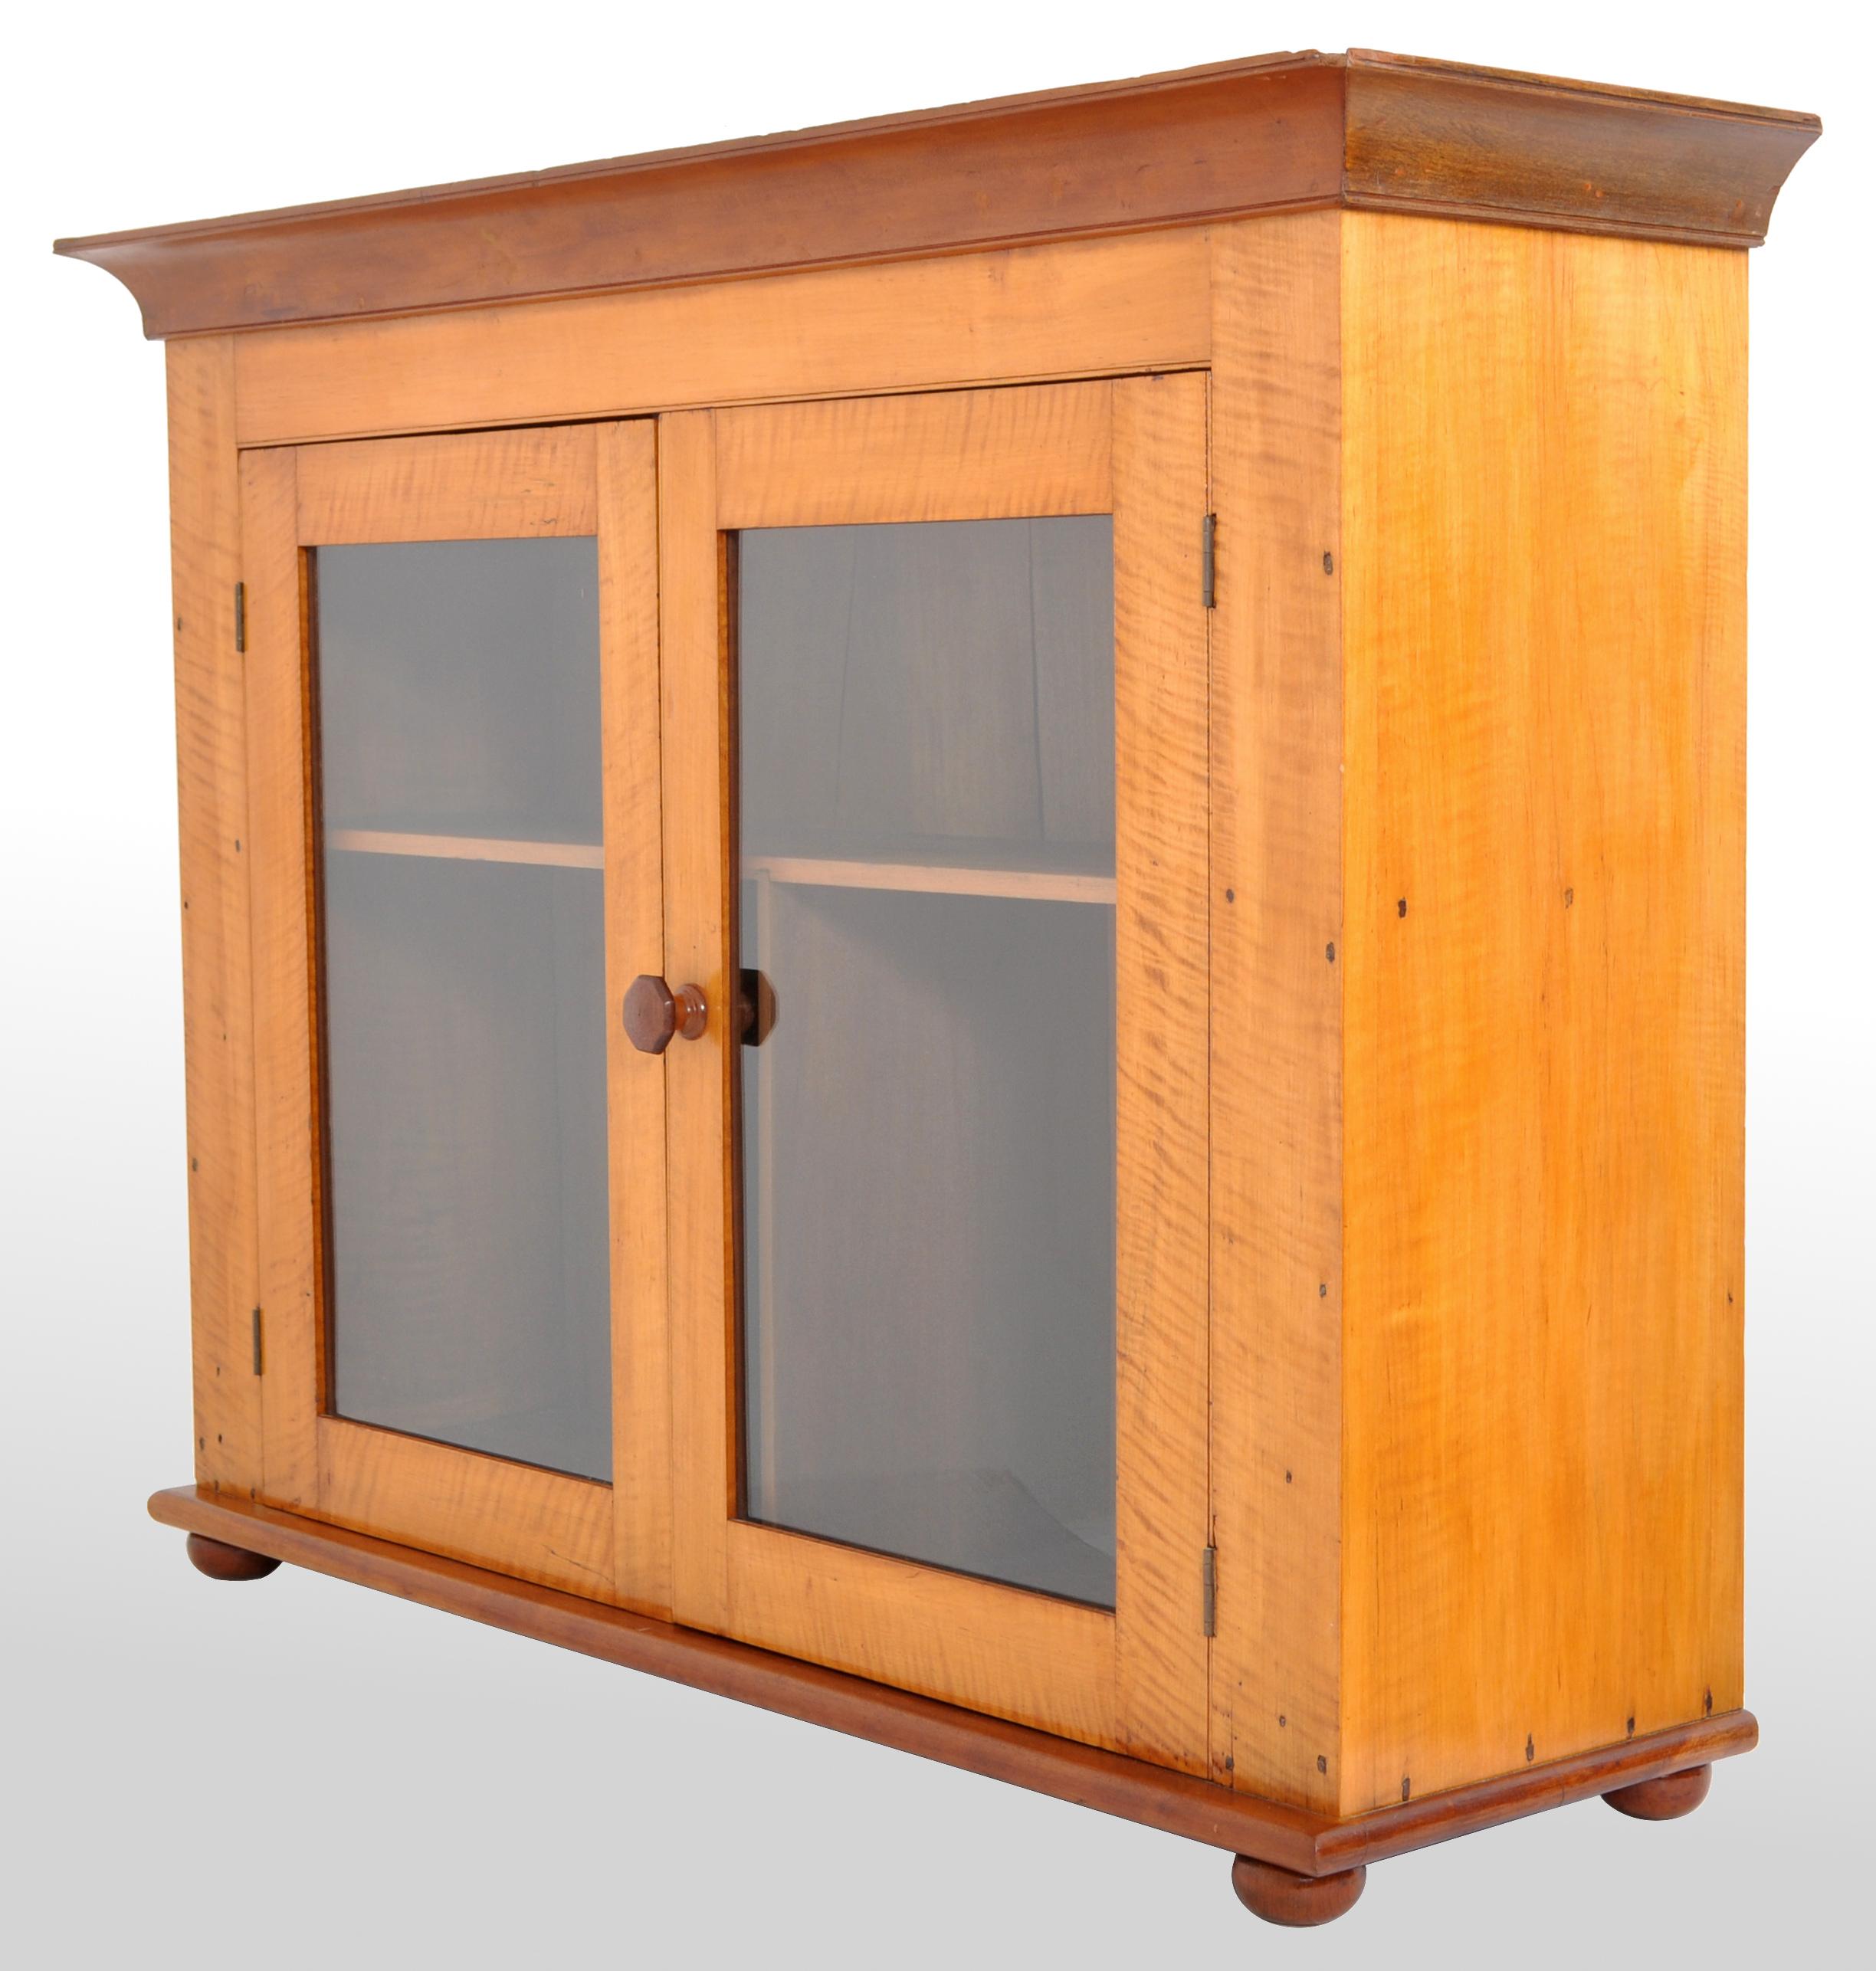 Antique American Country 'Tiger' maple twin door cabinet, Pennsylvania, circa 1840. The top having a flared cornice below two glazed doors enclosing a single shelf, standing on small compressed bun feet. A good pre-civil war American cabinet in